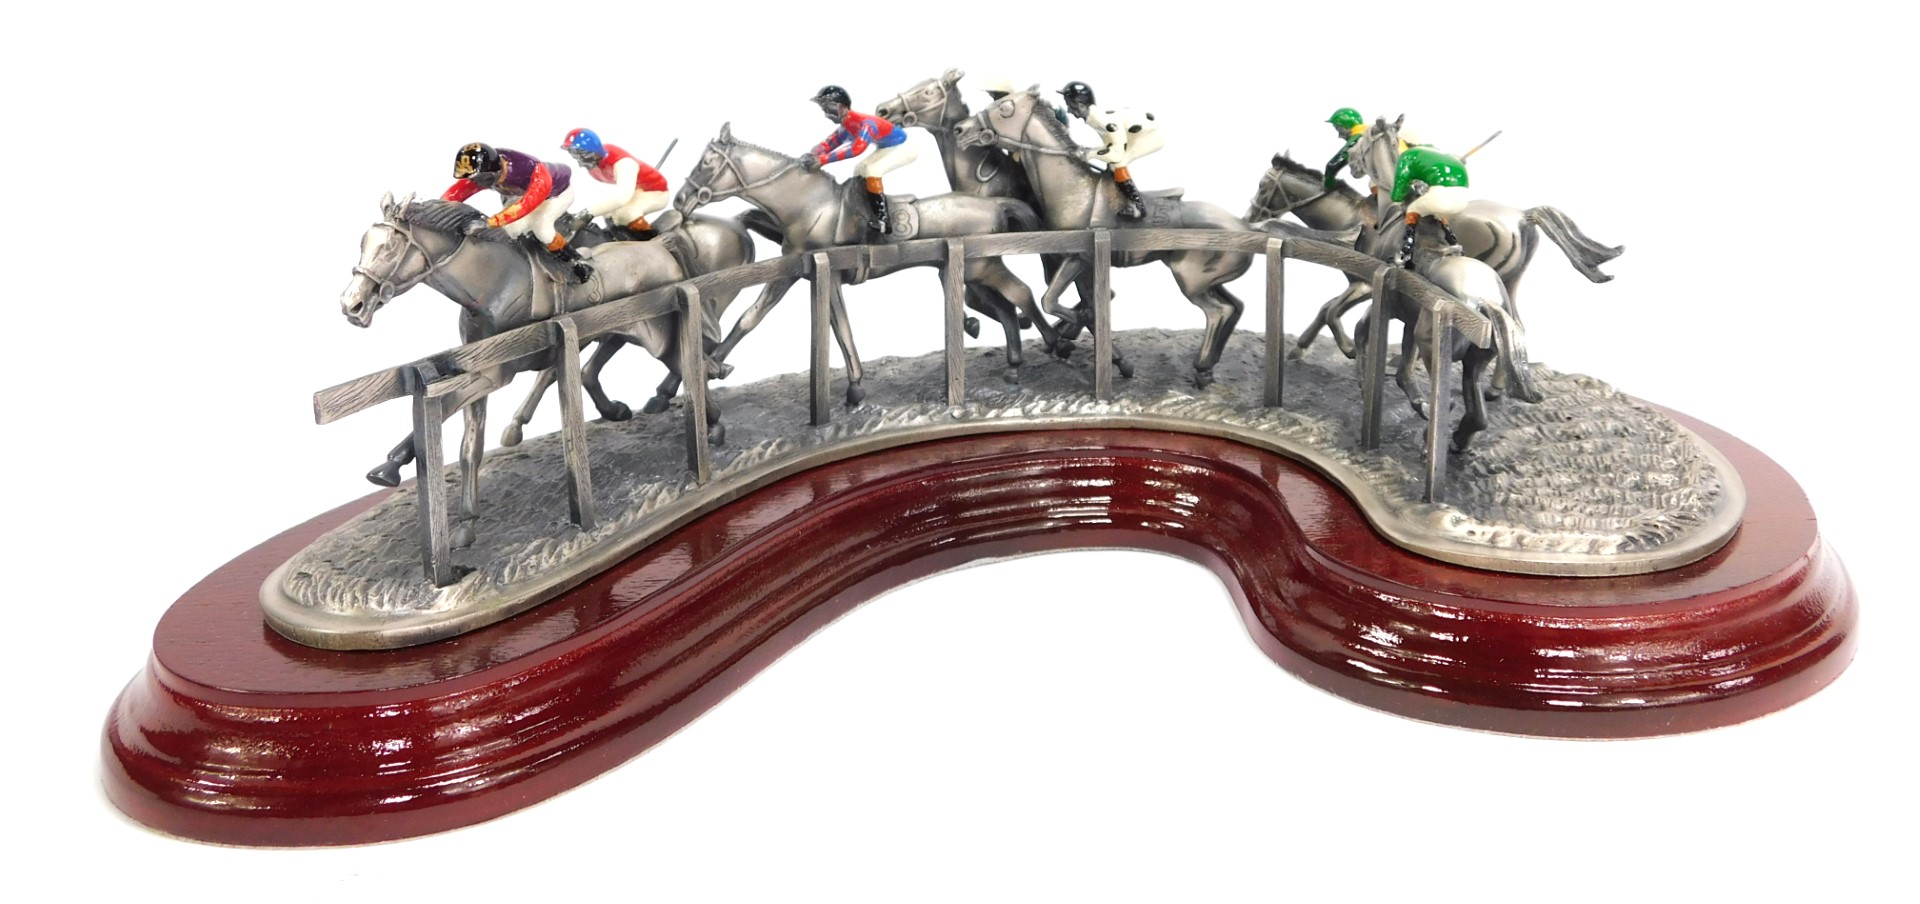 A Mark Models Limited horse racing figure group, Turing For Home Special, limited edition number 708